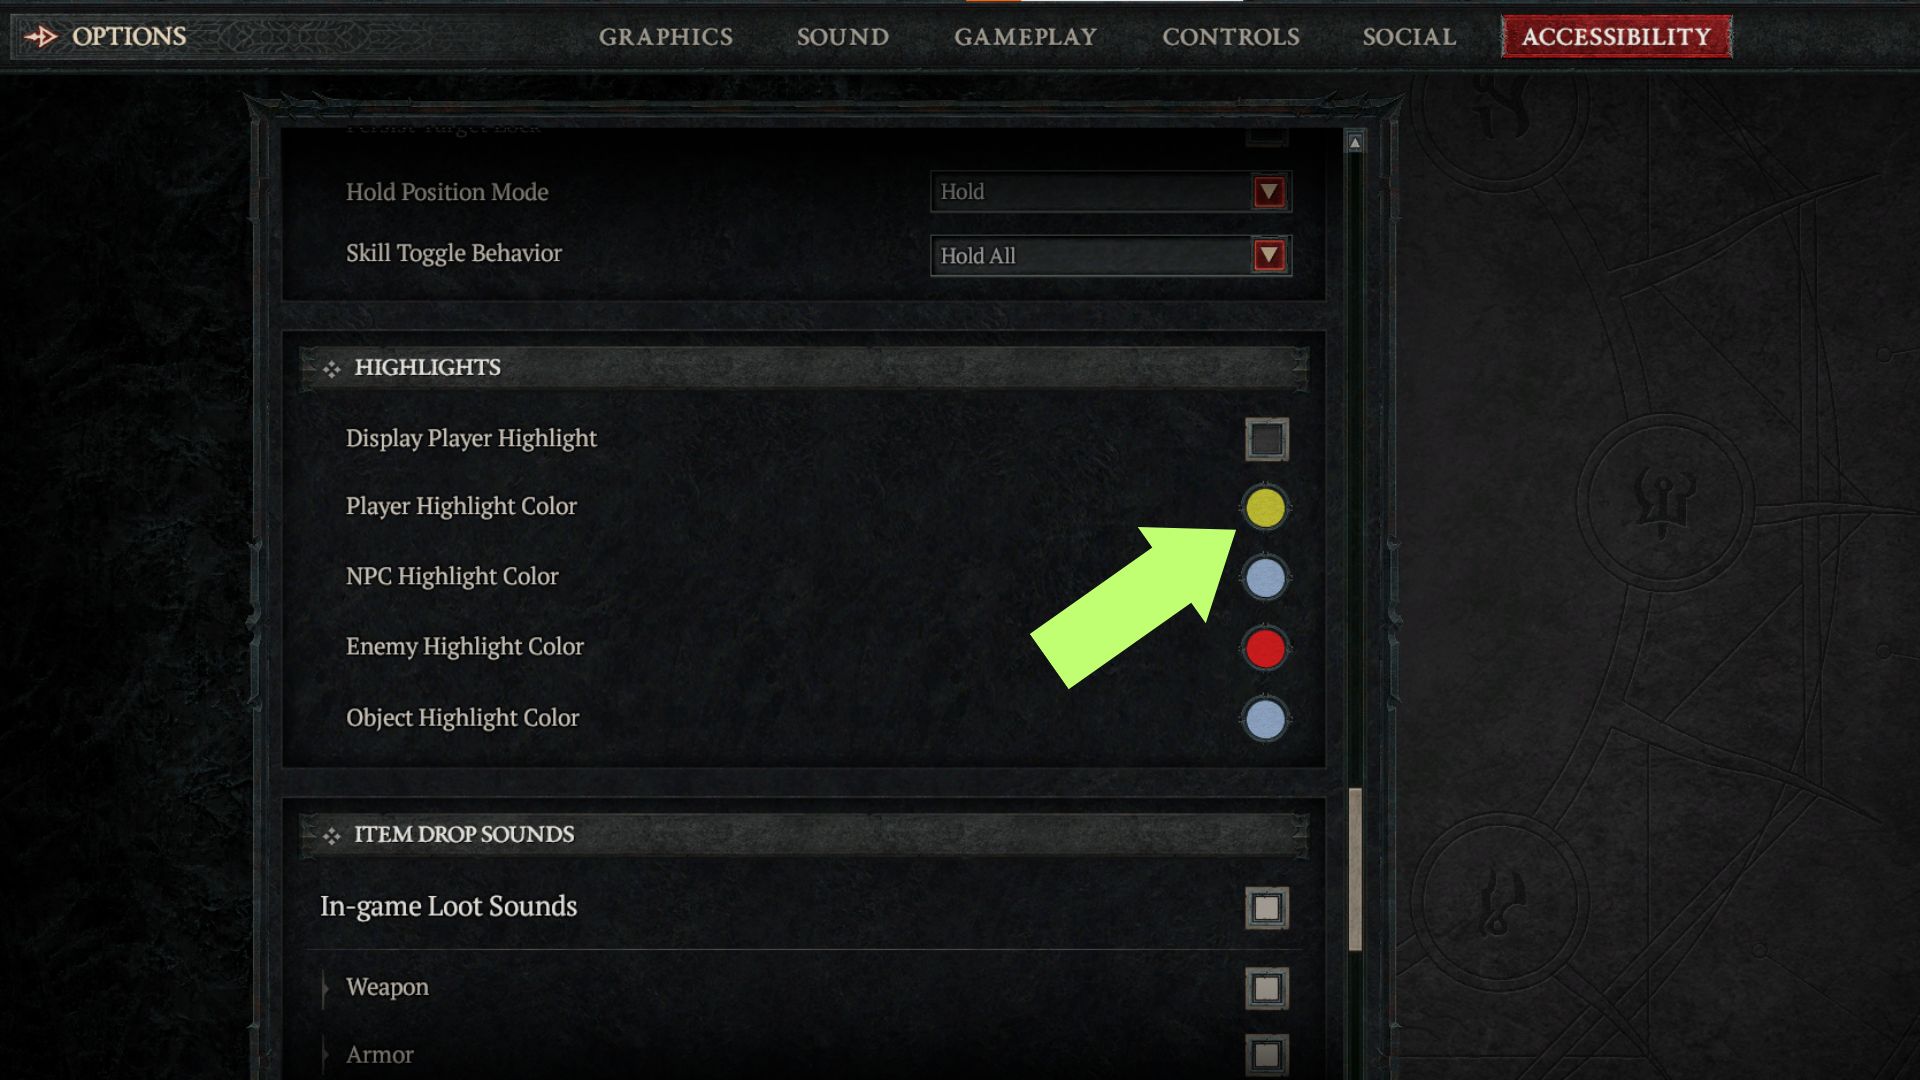 Select the Player Highlight Color you want in Diablo 4